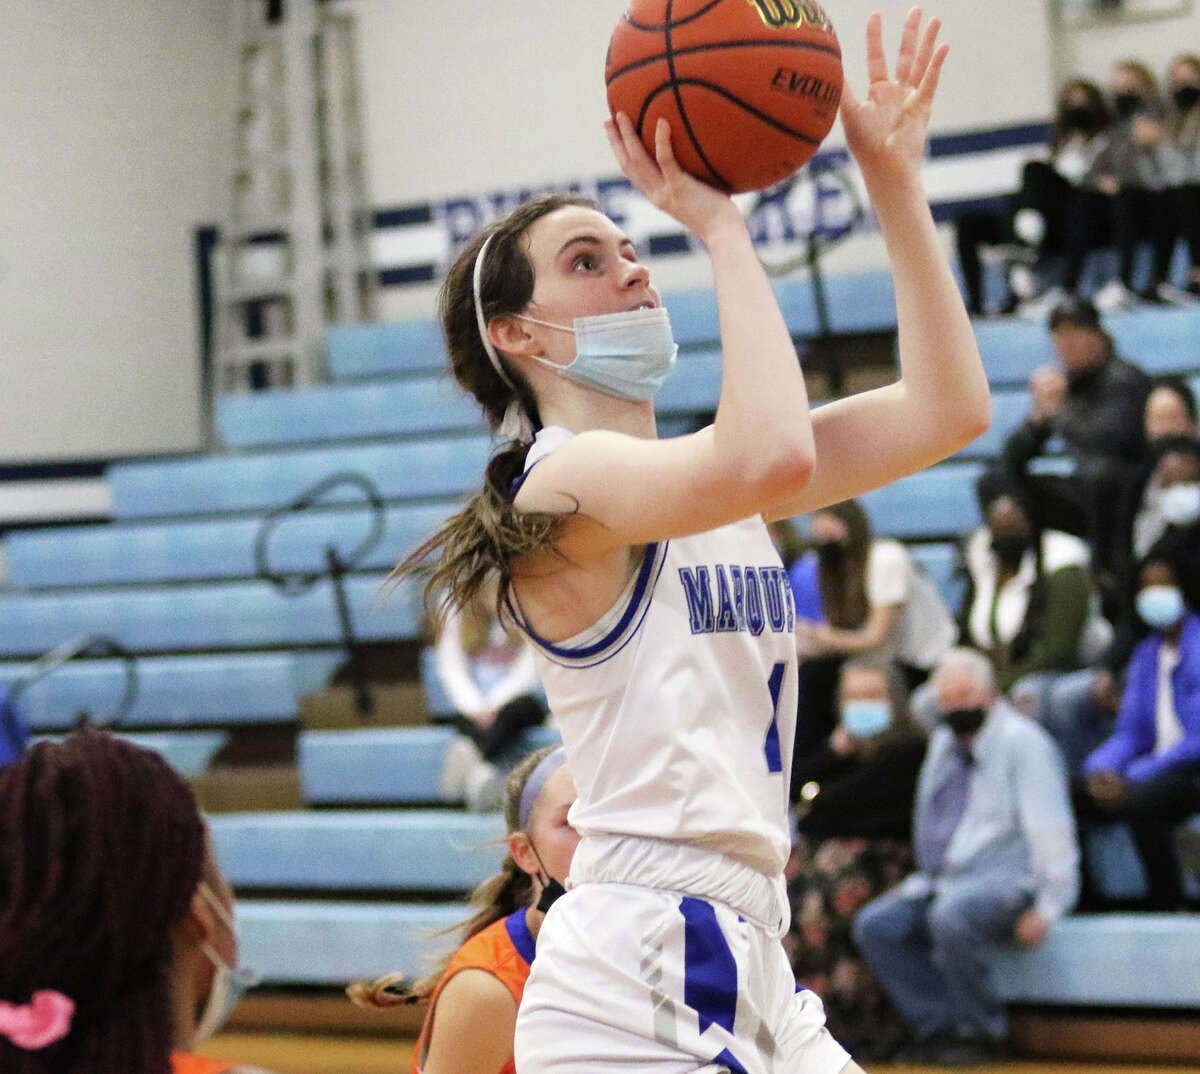 Marquette Catholic's Abby Williams, shown earlier this season in a game at Alton, scored a season-high 20 to lead the short-handed Explorers to victory Monday night over Granite City in Alton.